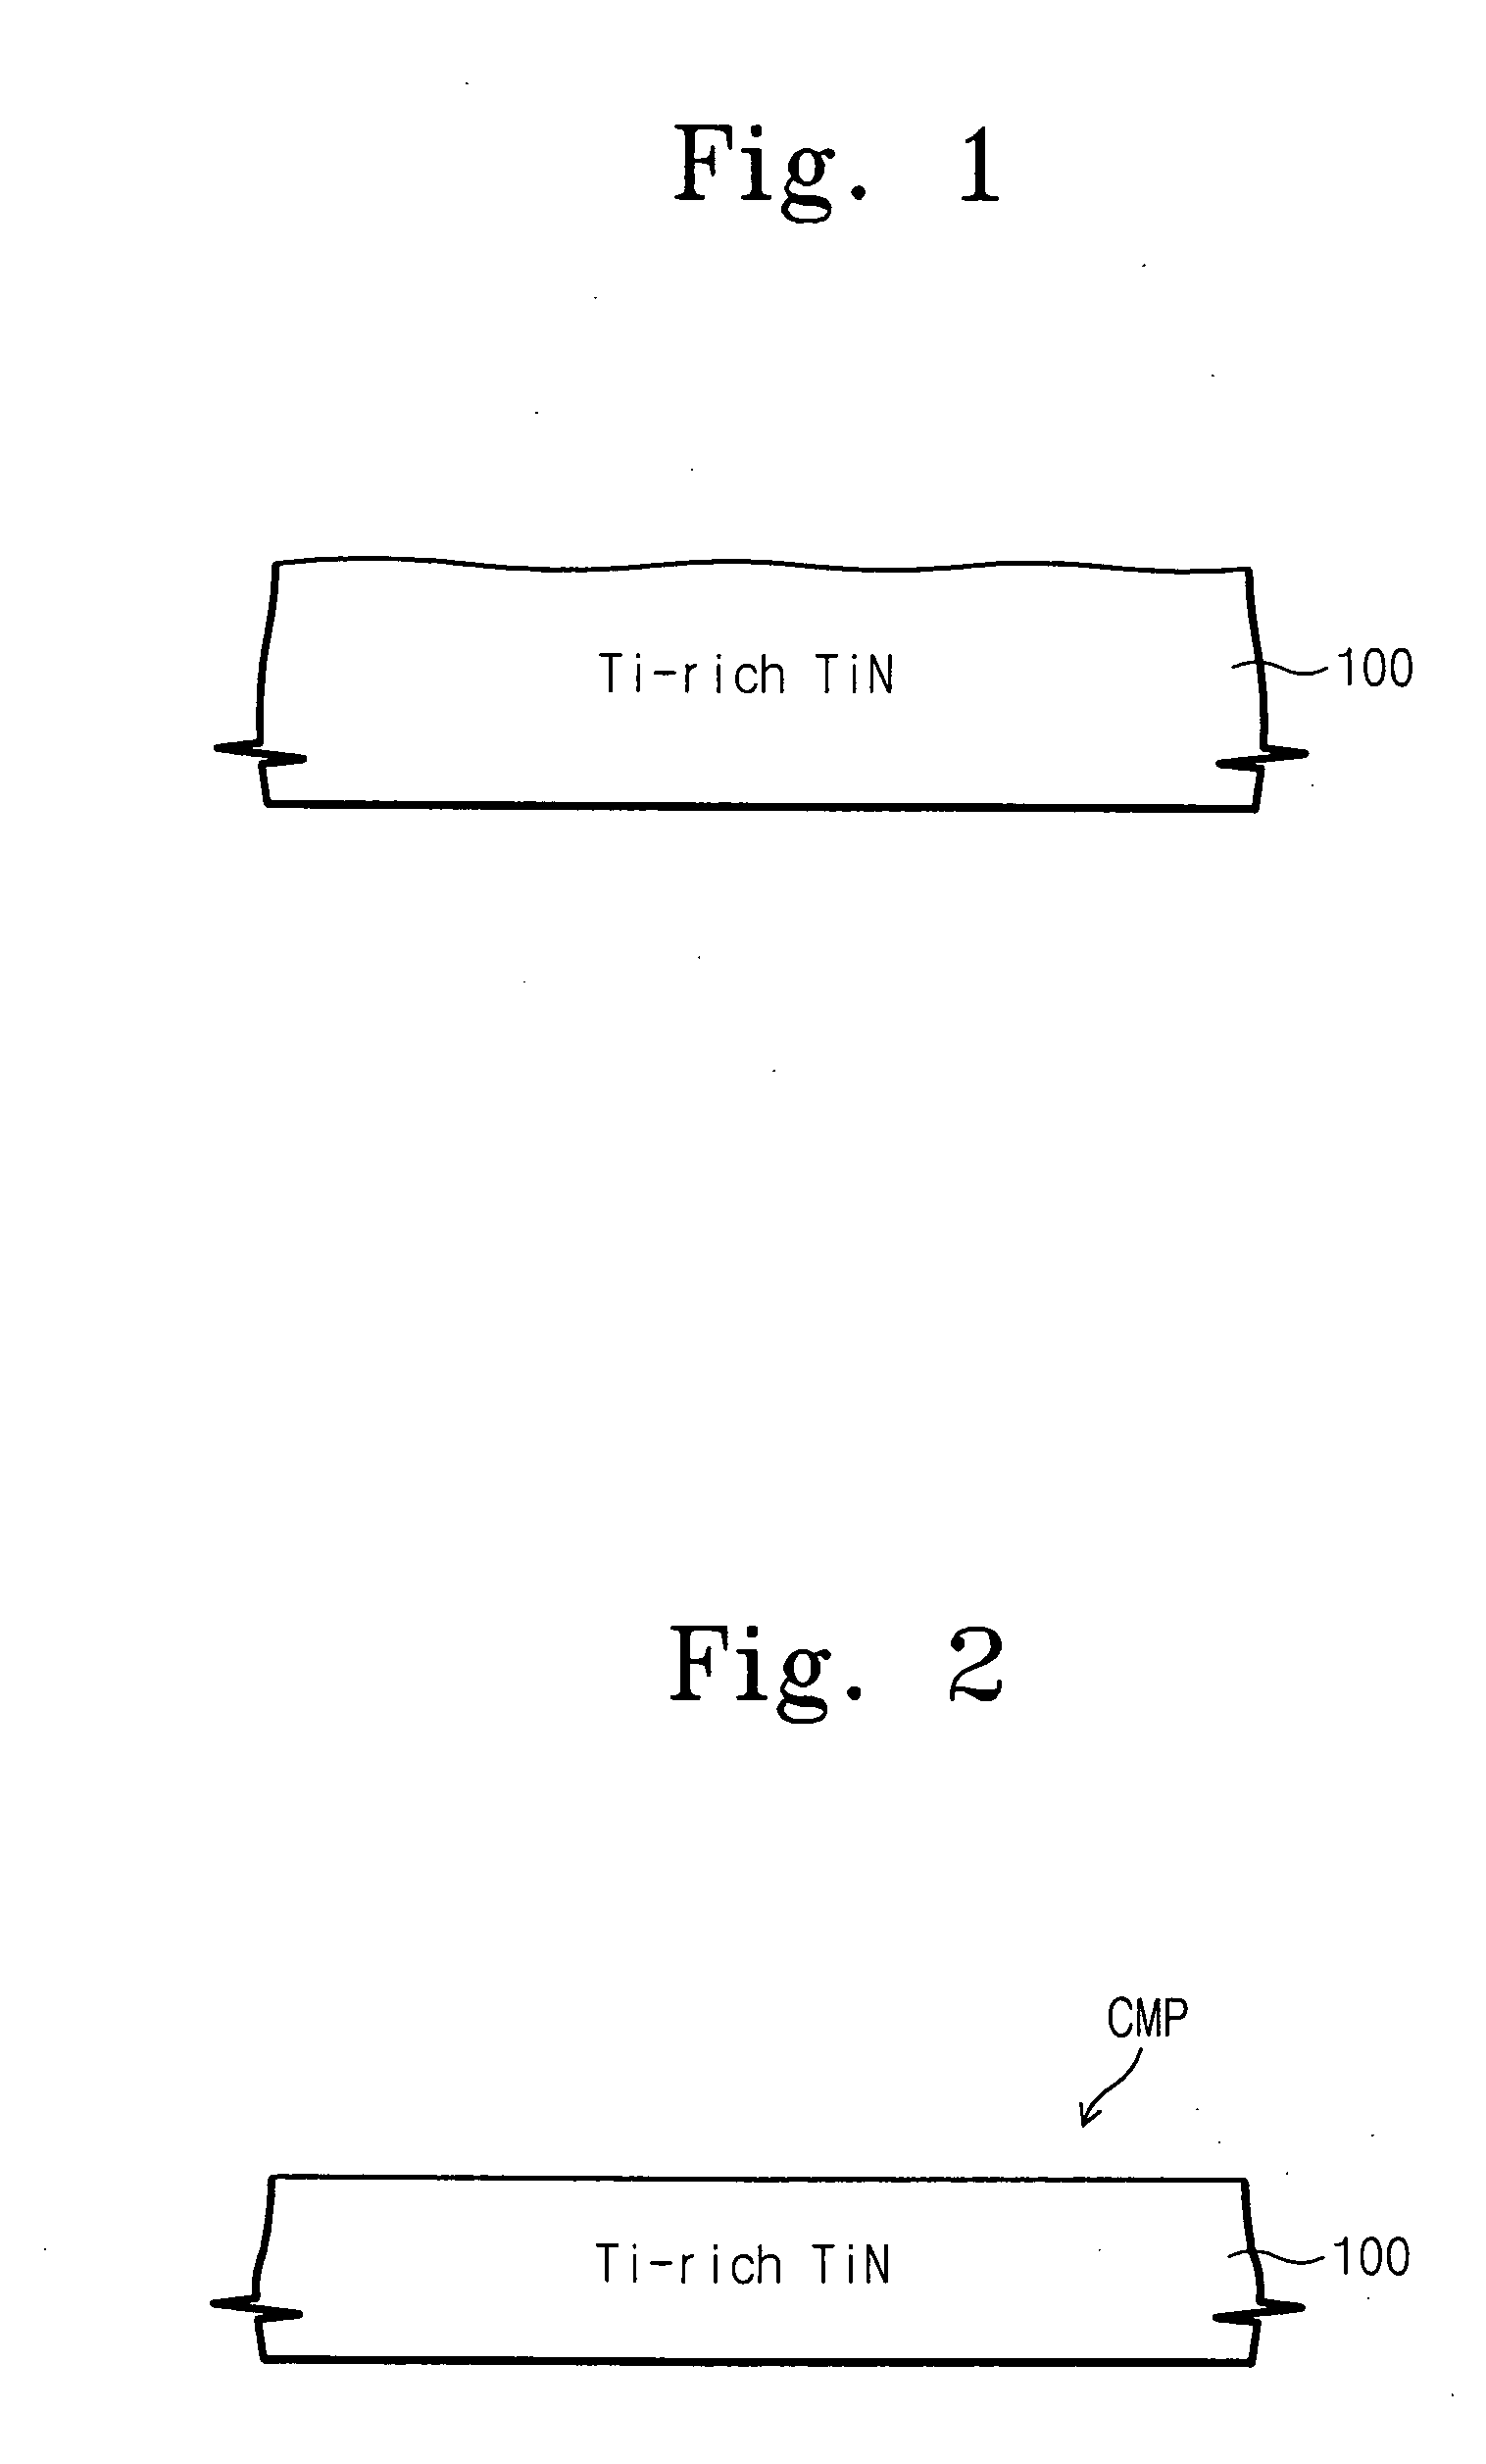 Magnetic random access memory devices having titanium-rich lower electrodes with oxide layer and oriented tunneling barrier, and methods for forming the same